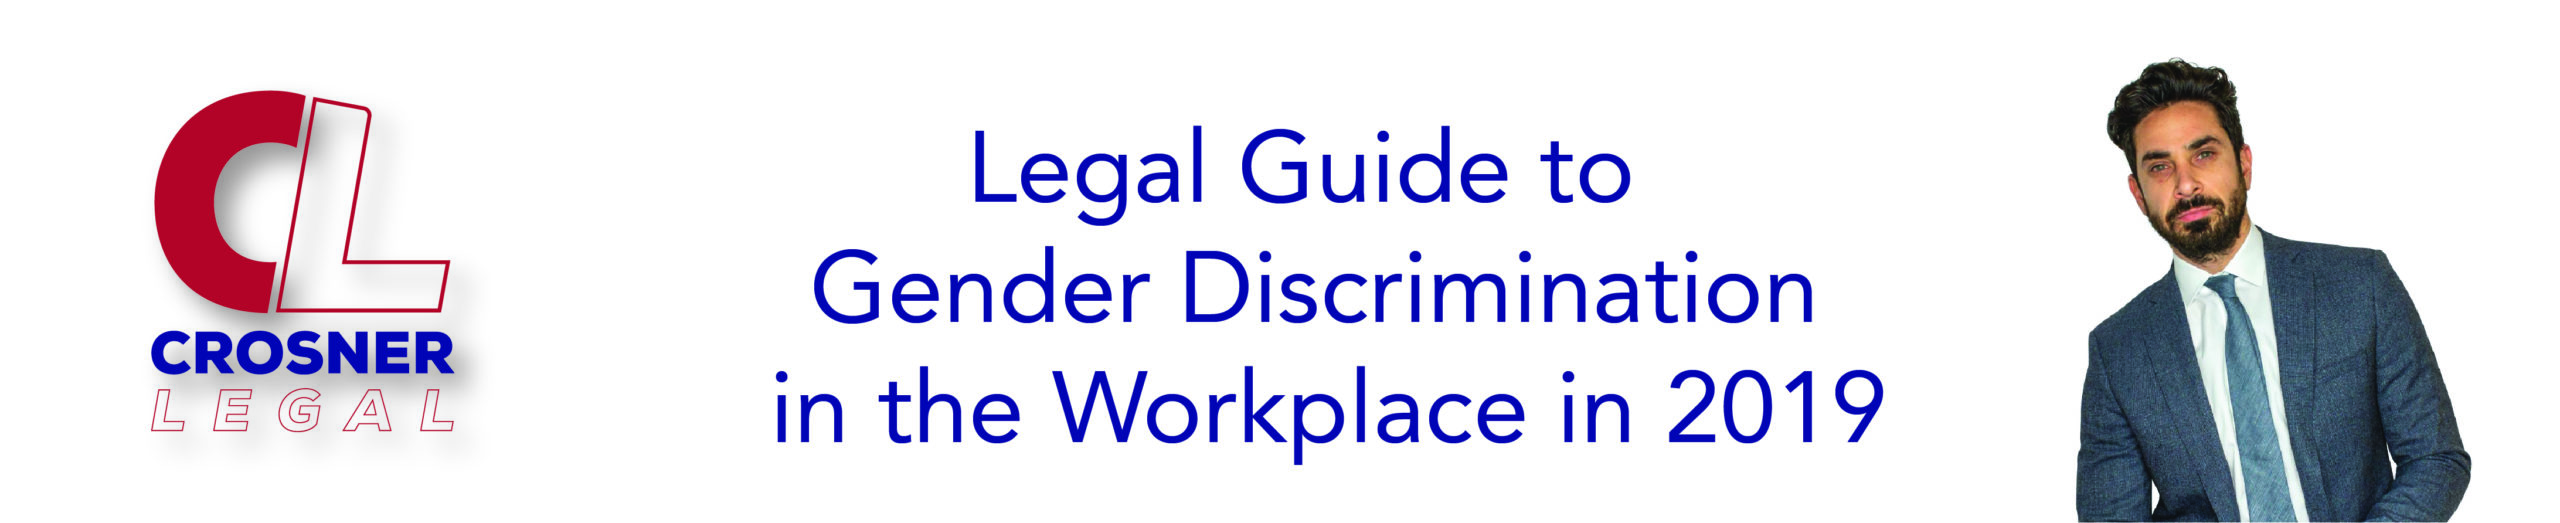 Legal Guide to Gender Discrimination in the Workplace in 2019